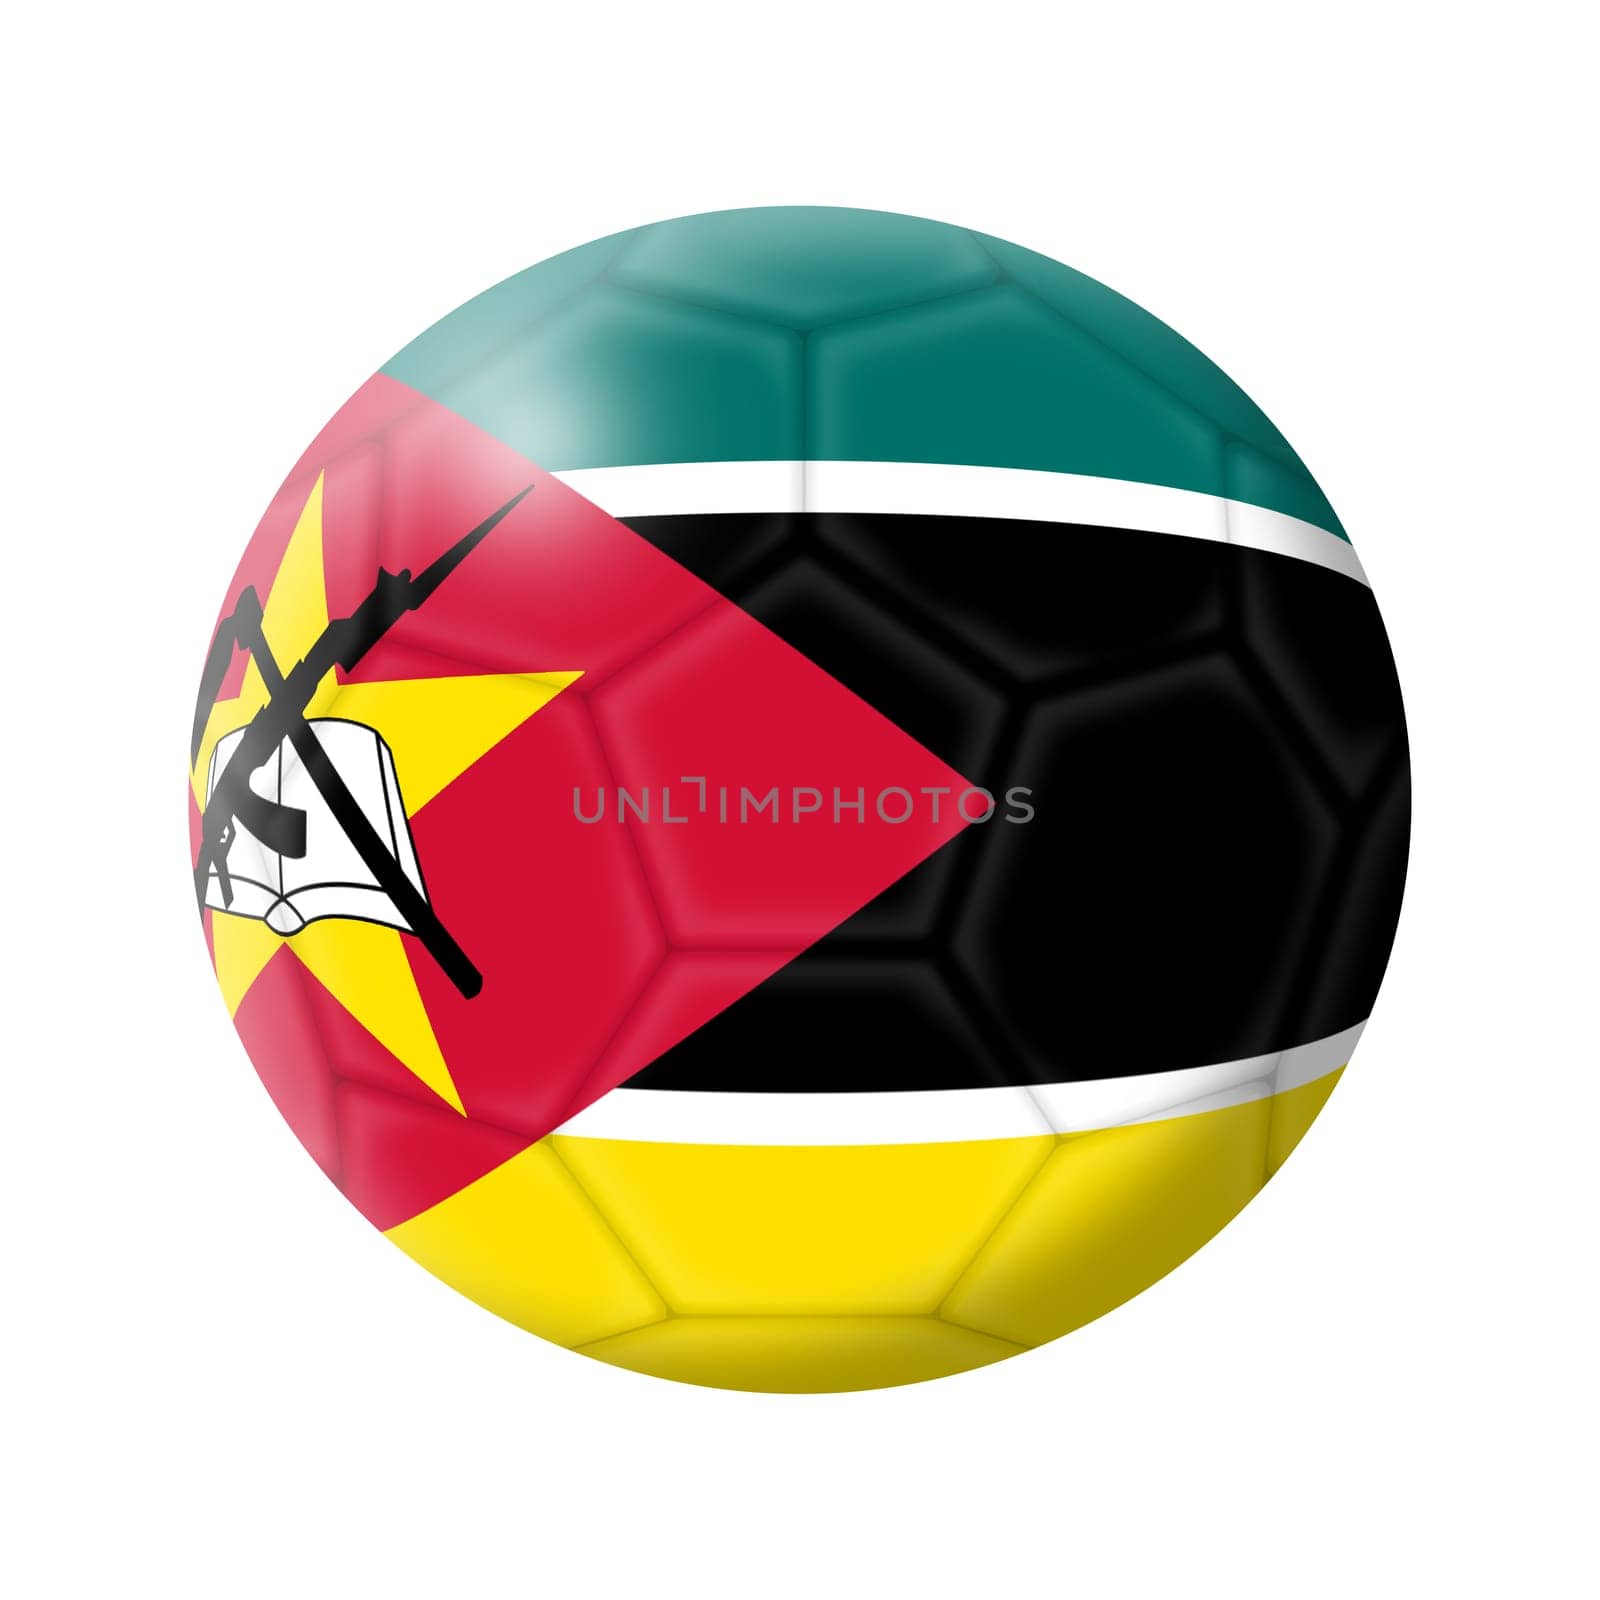 Mozambique soccer ball football 3d illustration by VivacityImages